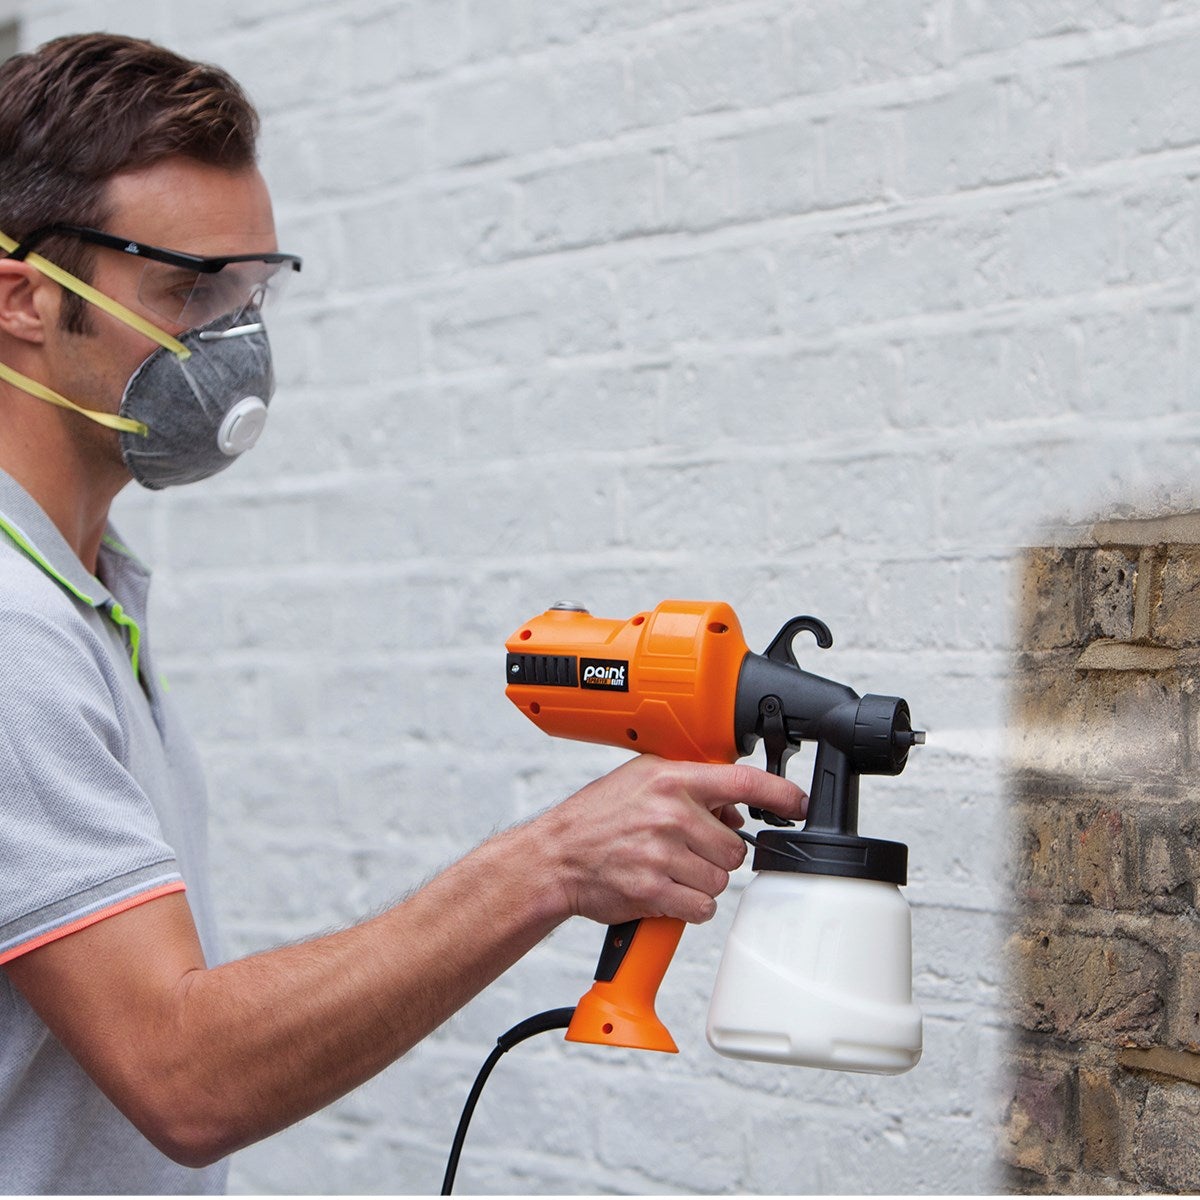 Top 5 Things to Look For When Buying a Paint Sprayer